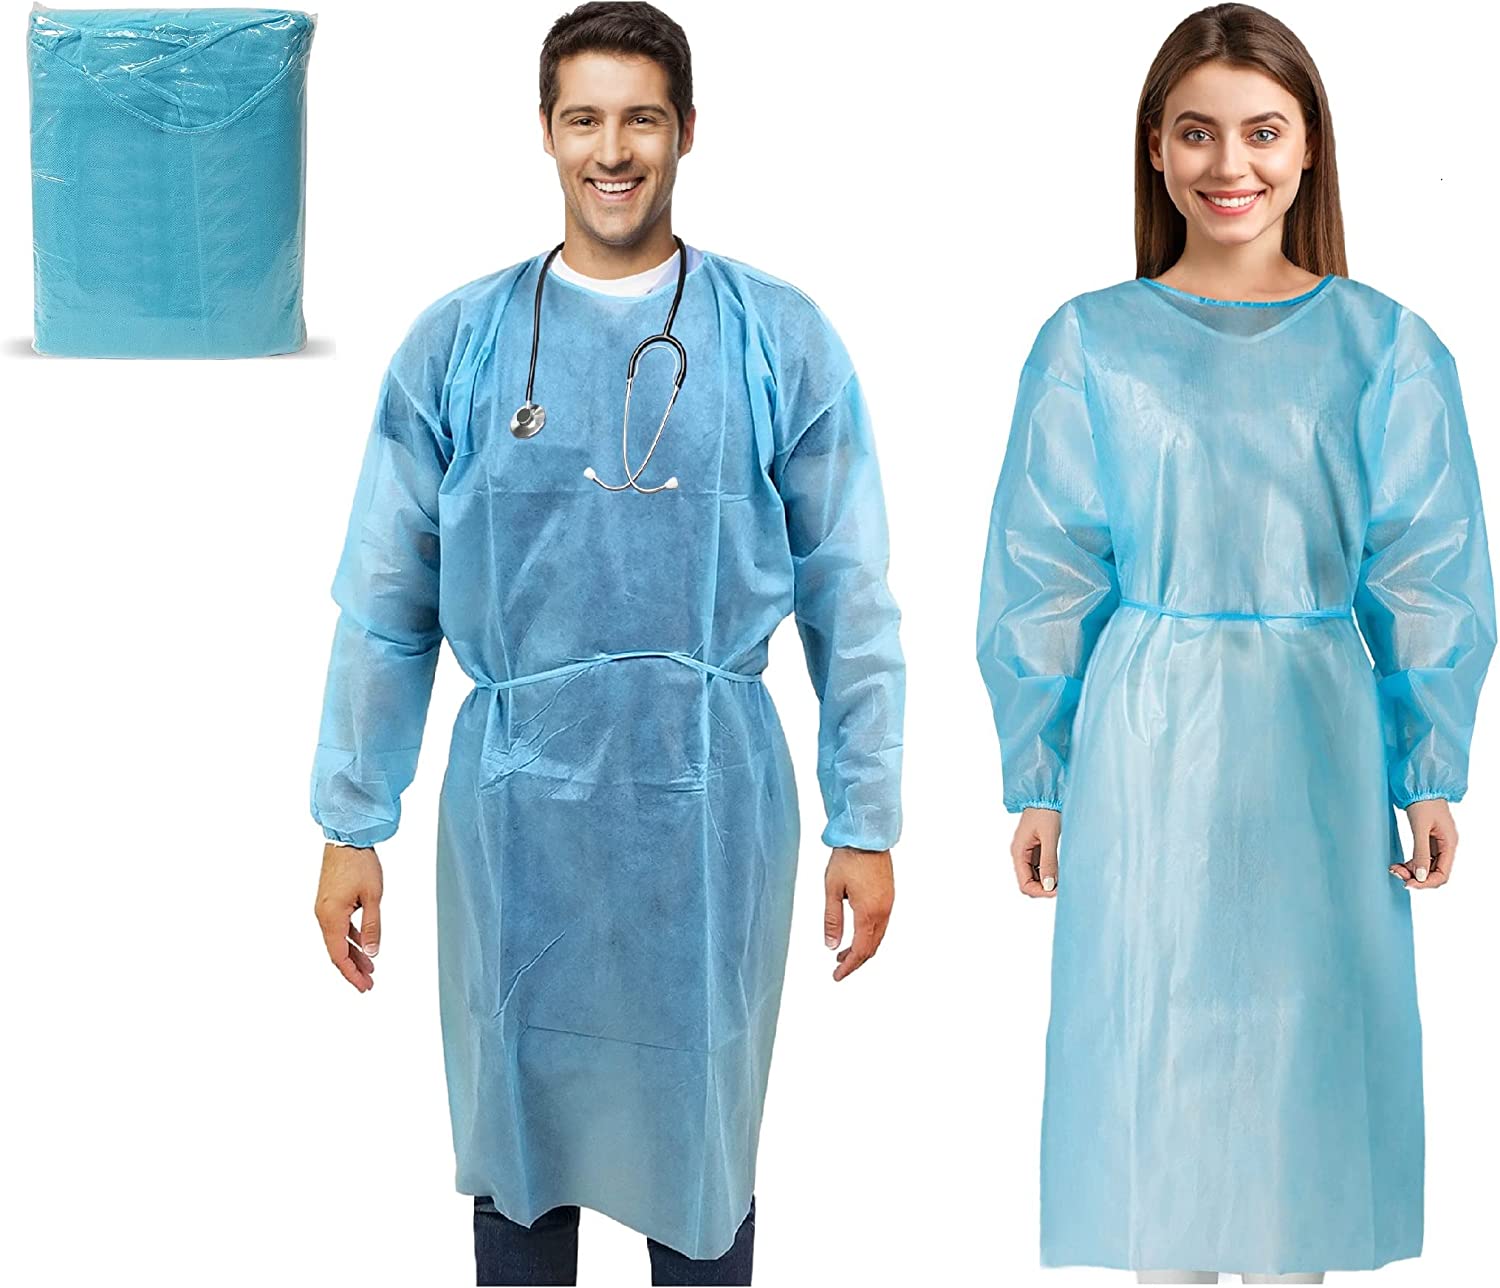 MEDICAL NATION 10 Pack Disposable Isolation Gowns – Blue Level 2 SMS 40gsm Non-Woven Material – PPE Gowns Disposable for Dental, Medical Use, Fluid-Resistant and Latex-Free Gowns, Universal Size